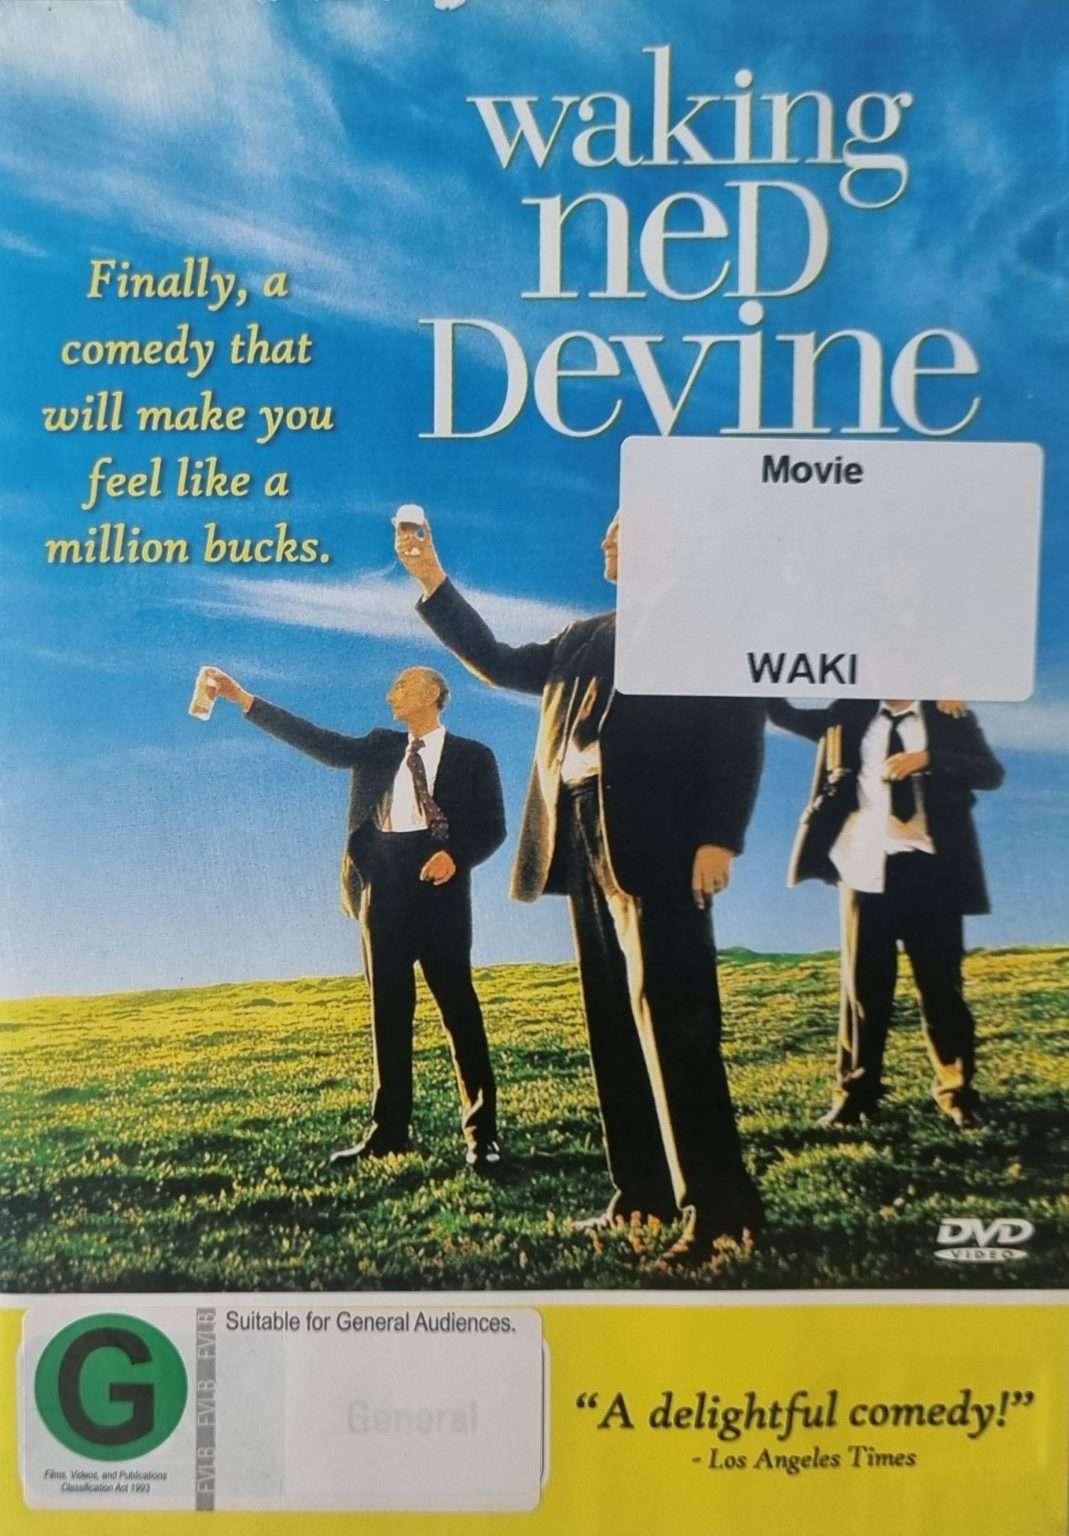 Waking Ned Devine (EX LIBRARY)